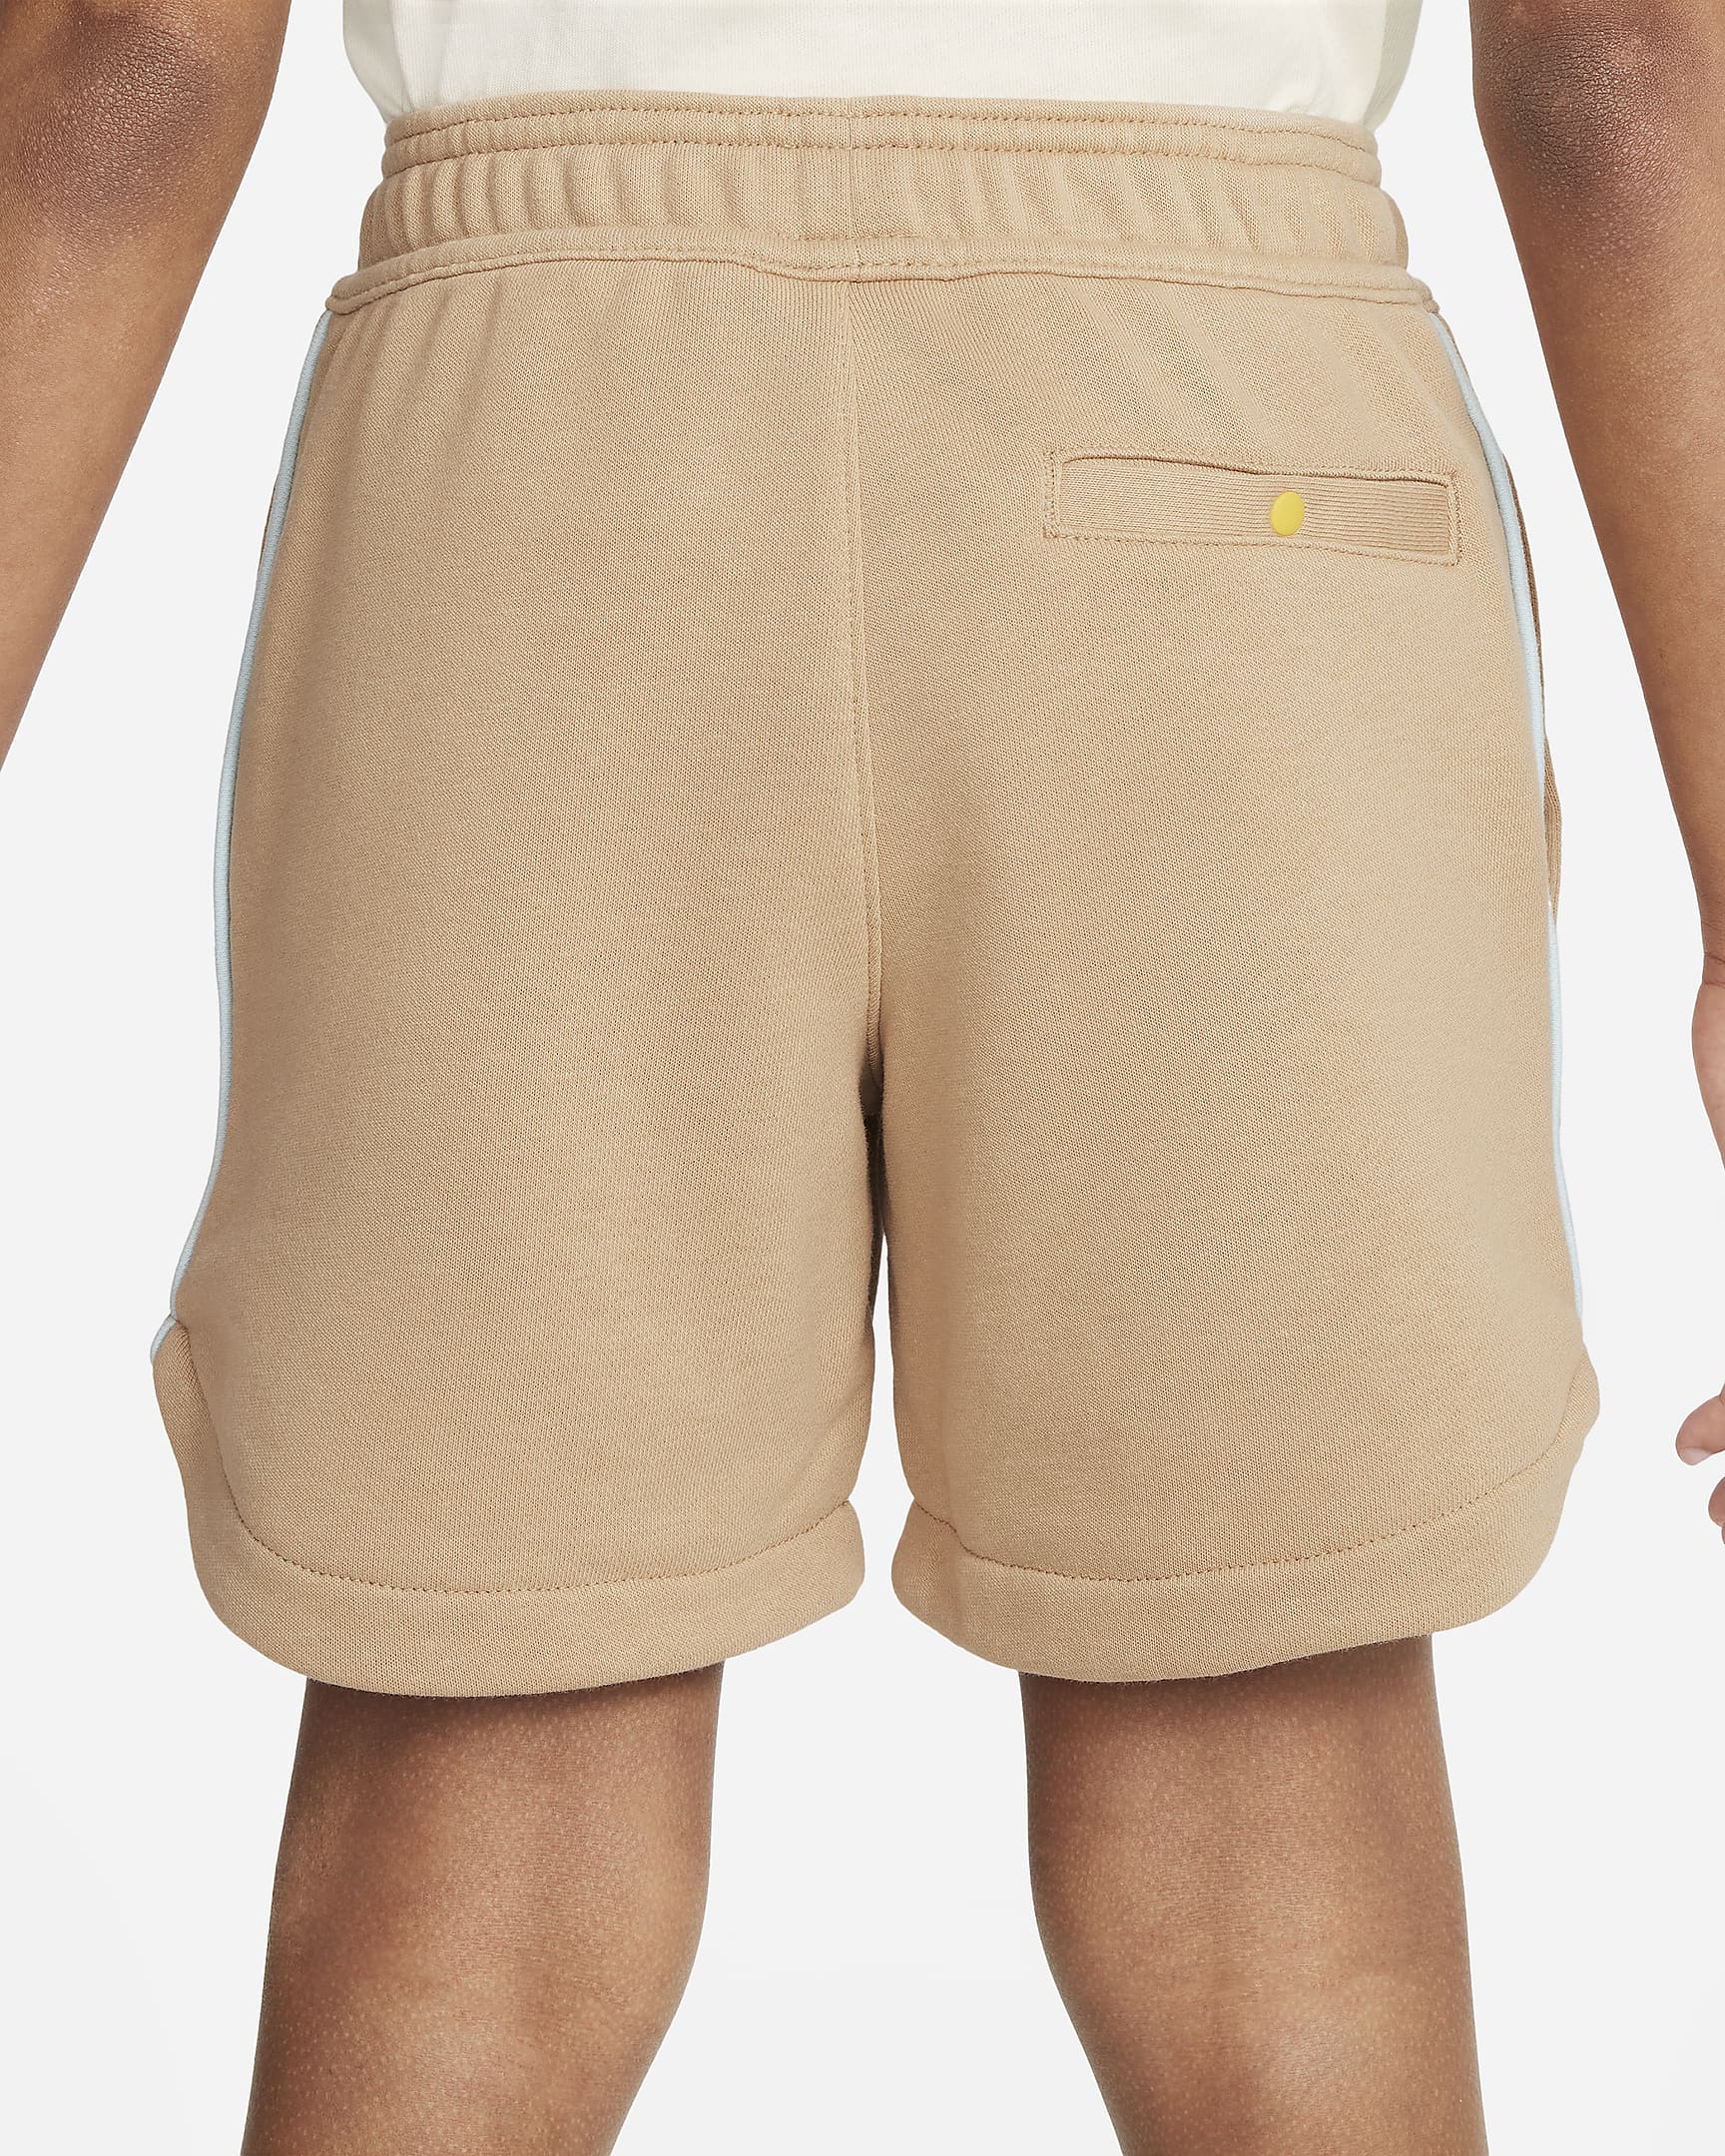 Nike Sportswear Create Your Own Adventure Younger Kids' French Terry Graphic Shorts - Hemp